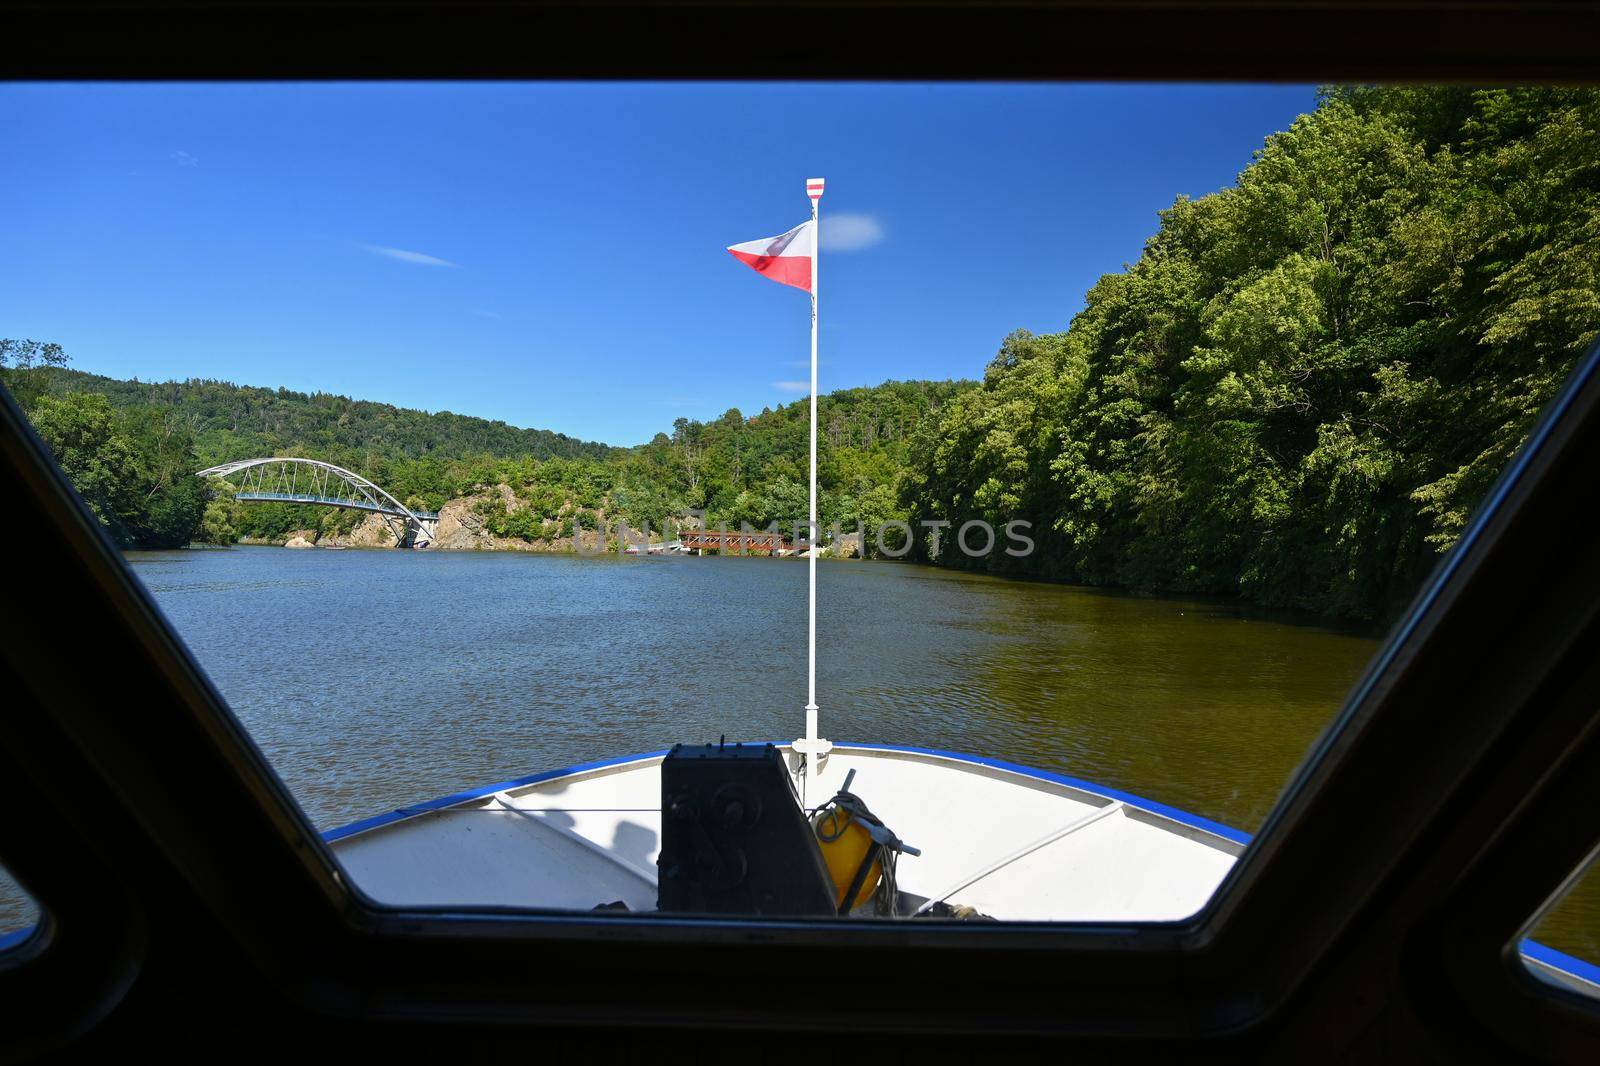 Brno Dam. Beautiful summer landscape in the Czech Republic. View from the cruise ship.